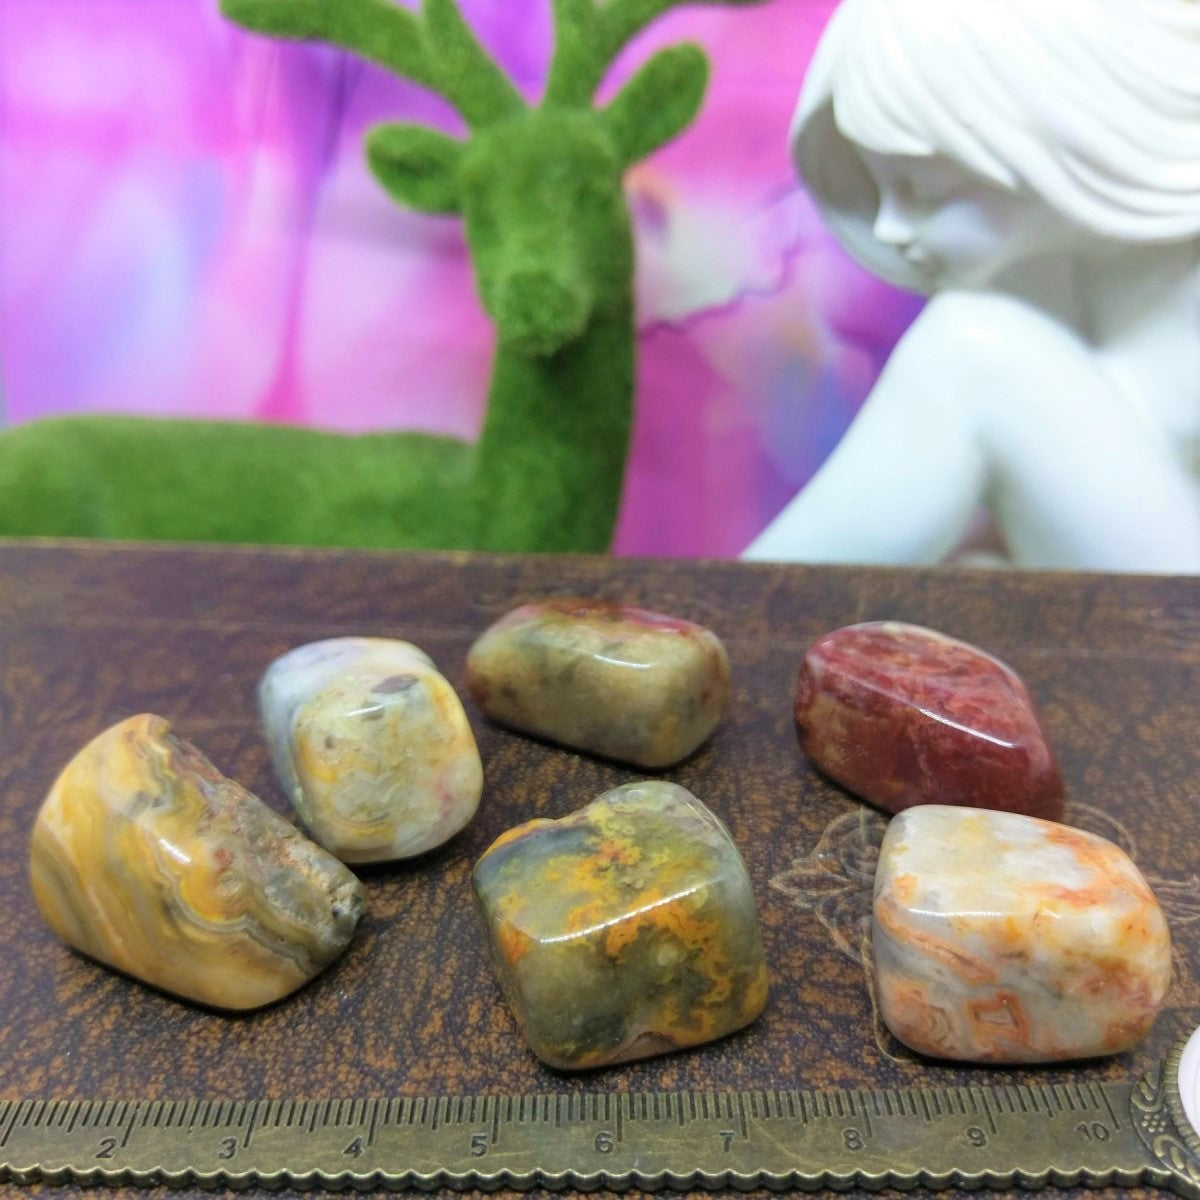 Crazy Lace Agate Tumbled Stones.